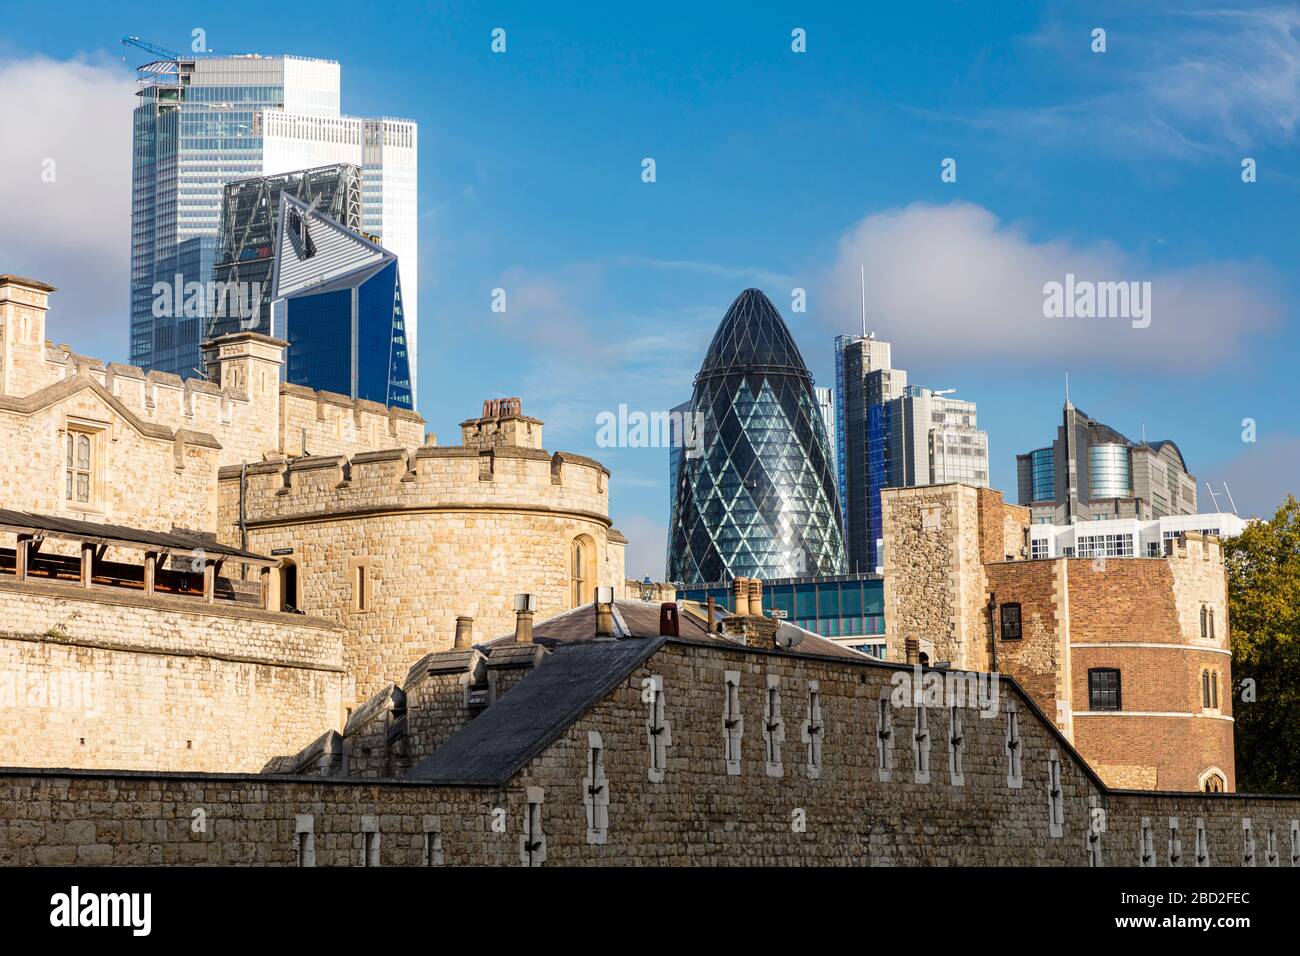 Old and New - Medieval Tower of London with the Gherkin and modern buildings beyone, London, England, UK Stock Photo